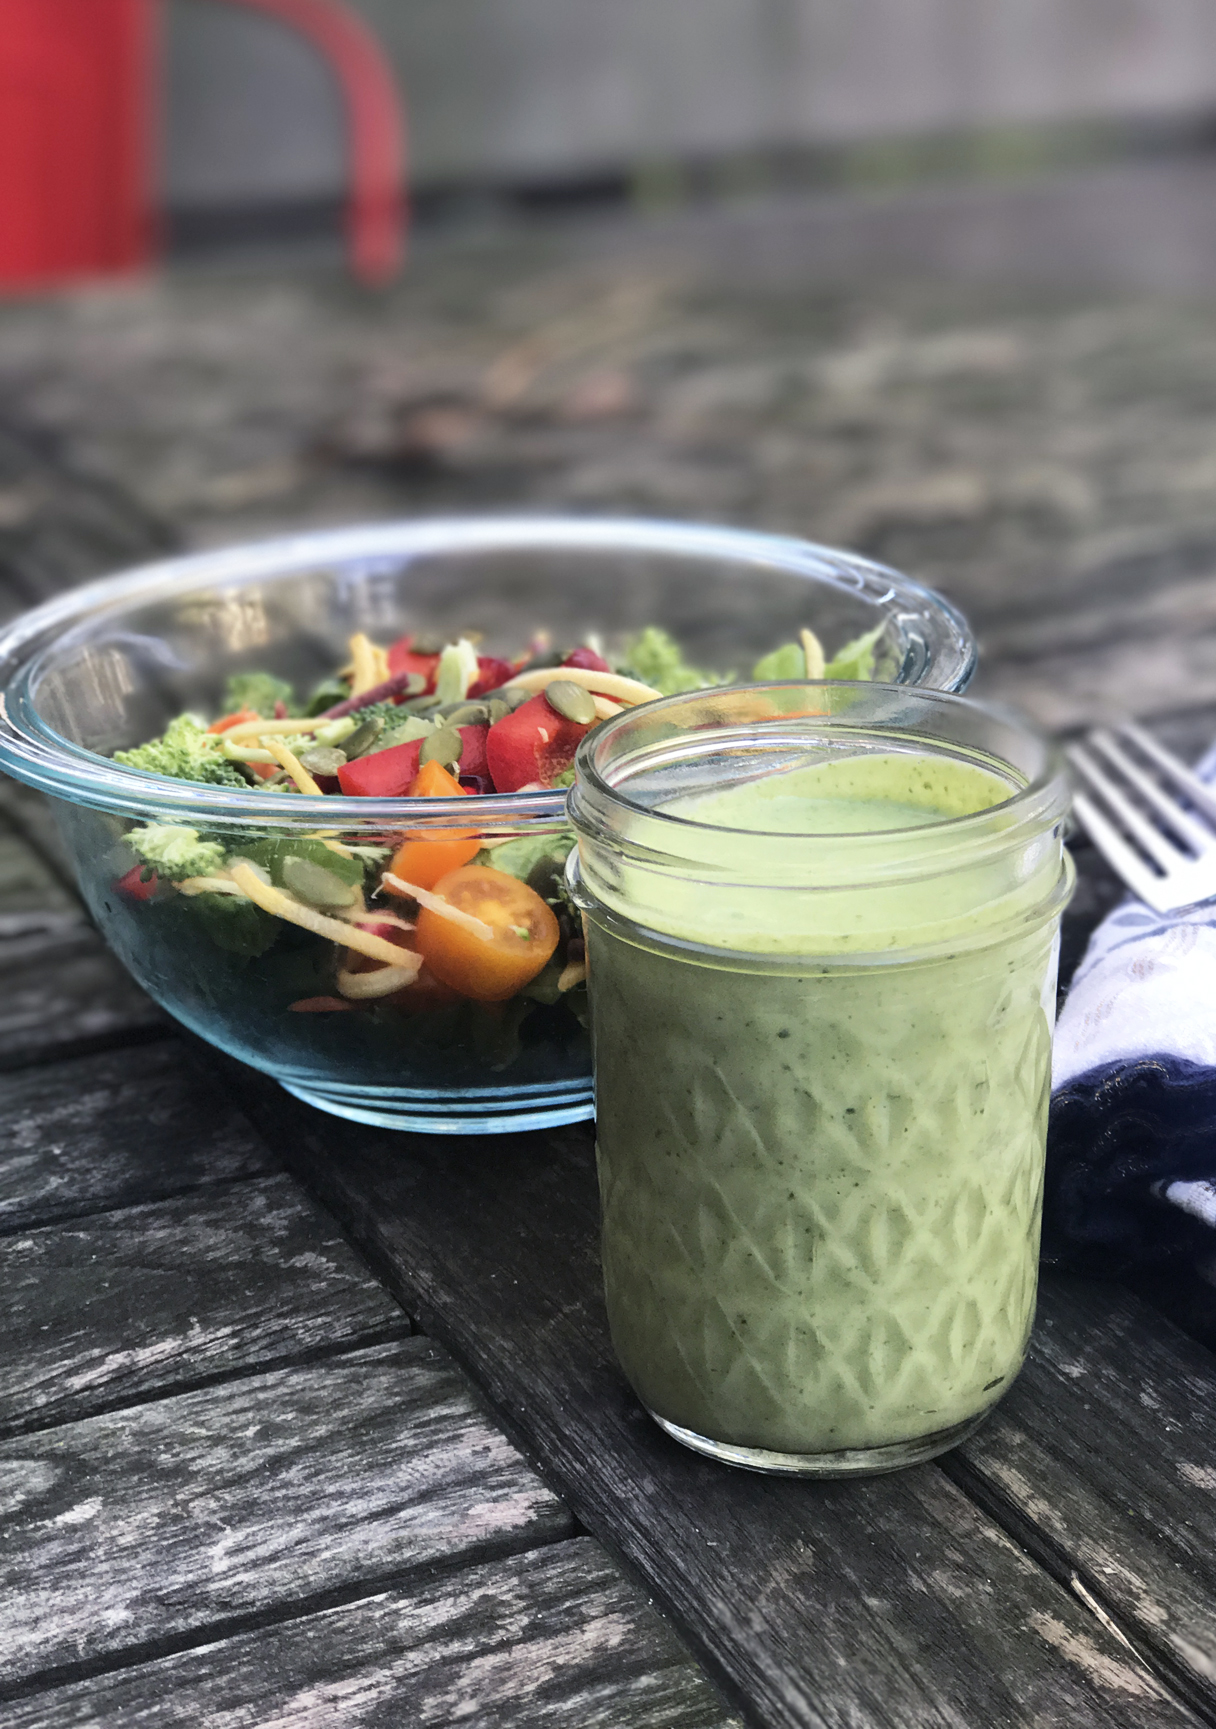 A super creamy Green Goddess salad dressing recipe that's vegan and Paleo-friendly that the kids love. Nobody will know it's healthy and you can even make it without oil too. Amazing! | Cool Mom Eats